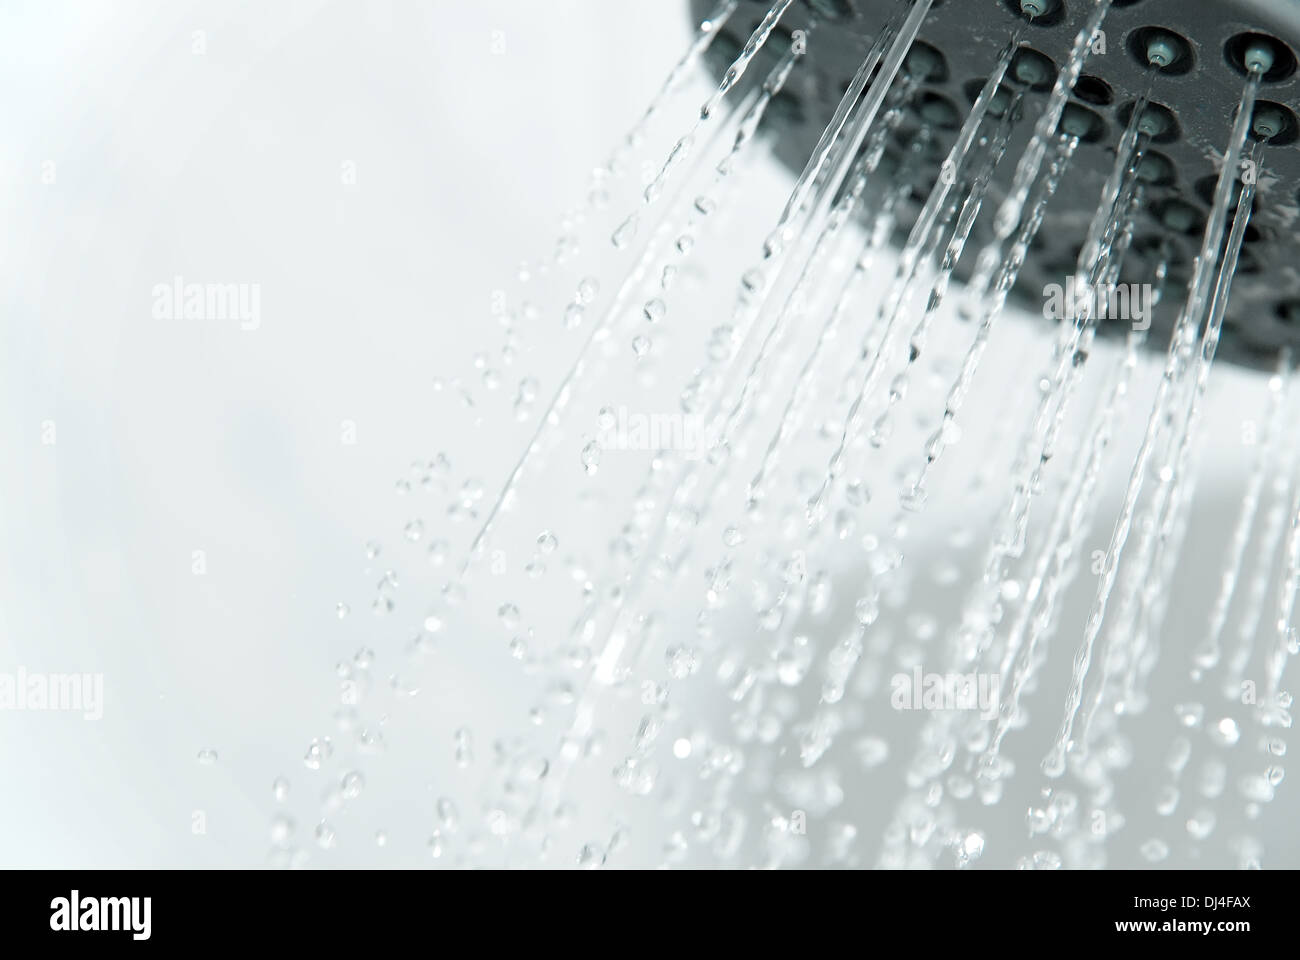 Shower head with water jets exiting Stock Photo